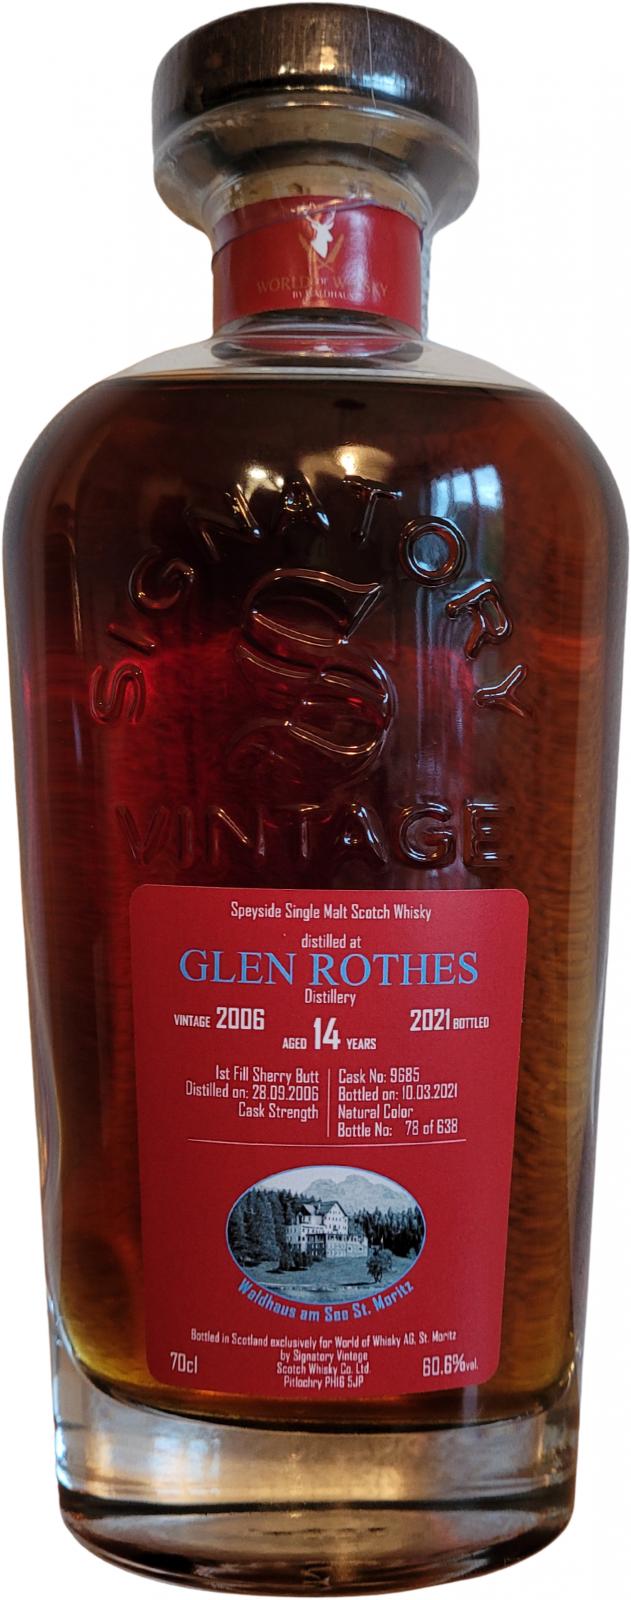 Glenrothes 2006 SV Cask Strength Collection 14 Year Old 2021 Release (Cask #9685) Single Malt Scotch Whisky | 700ML